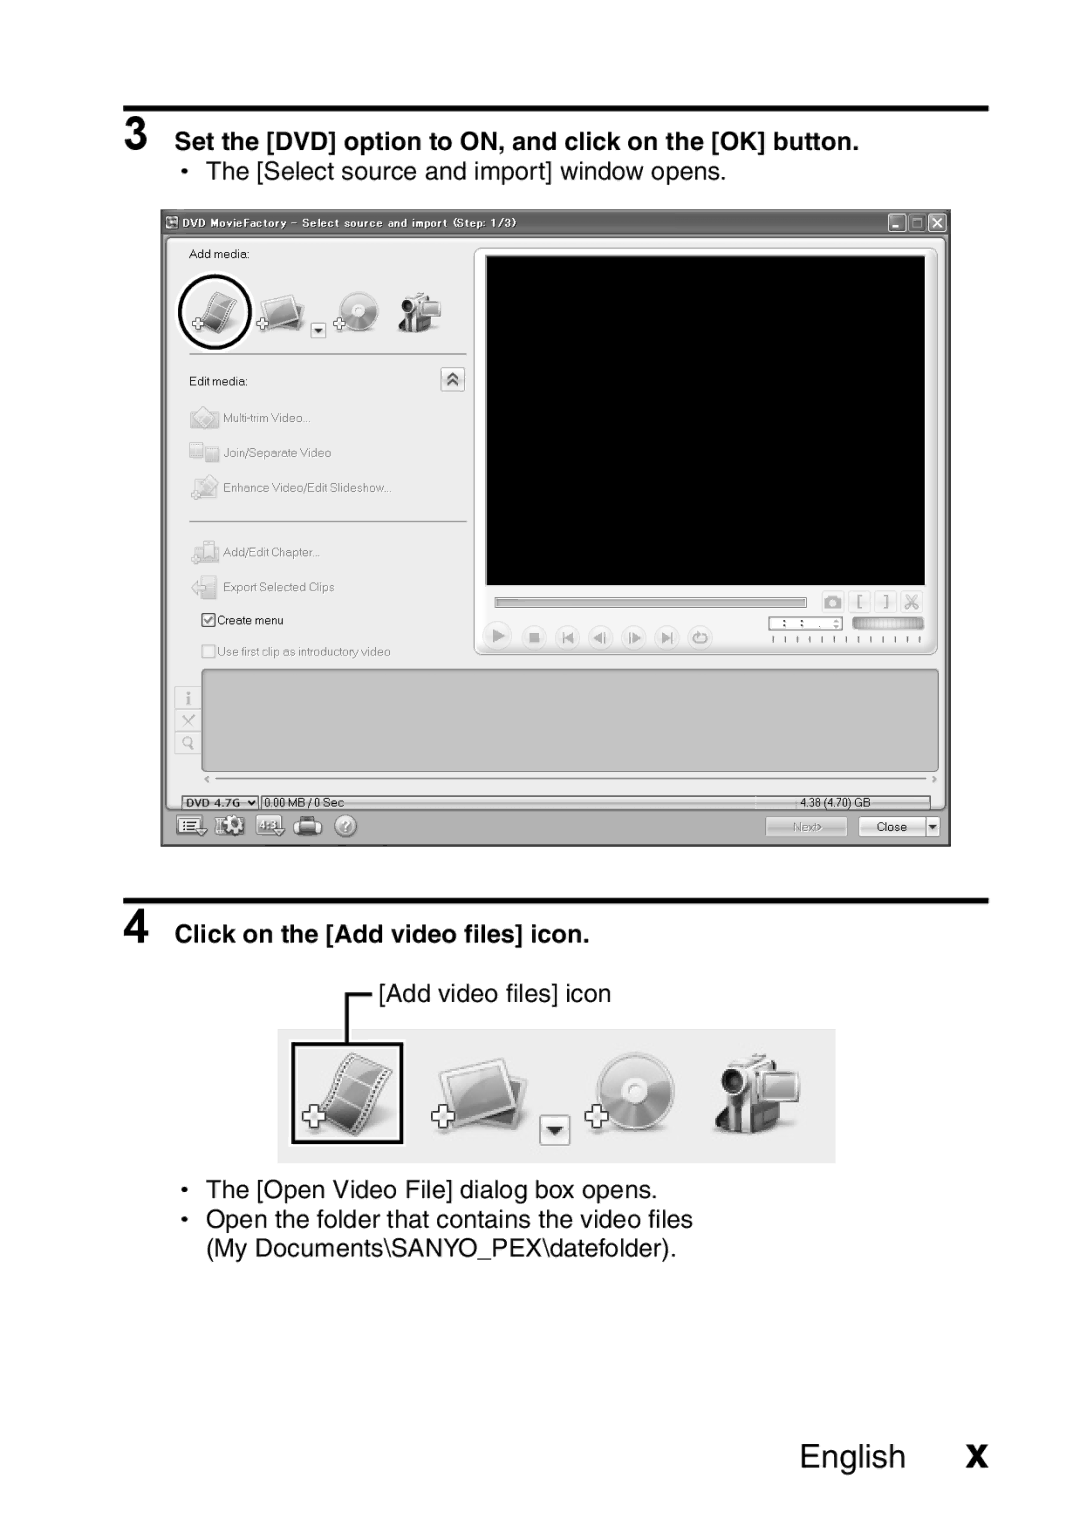 Sanyo VPC-H2GX, VPC-HD2EX Set the DVD option to ON, and click on the OK button, Click on the Add video files icon 